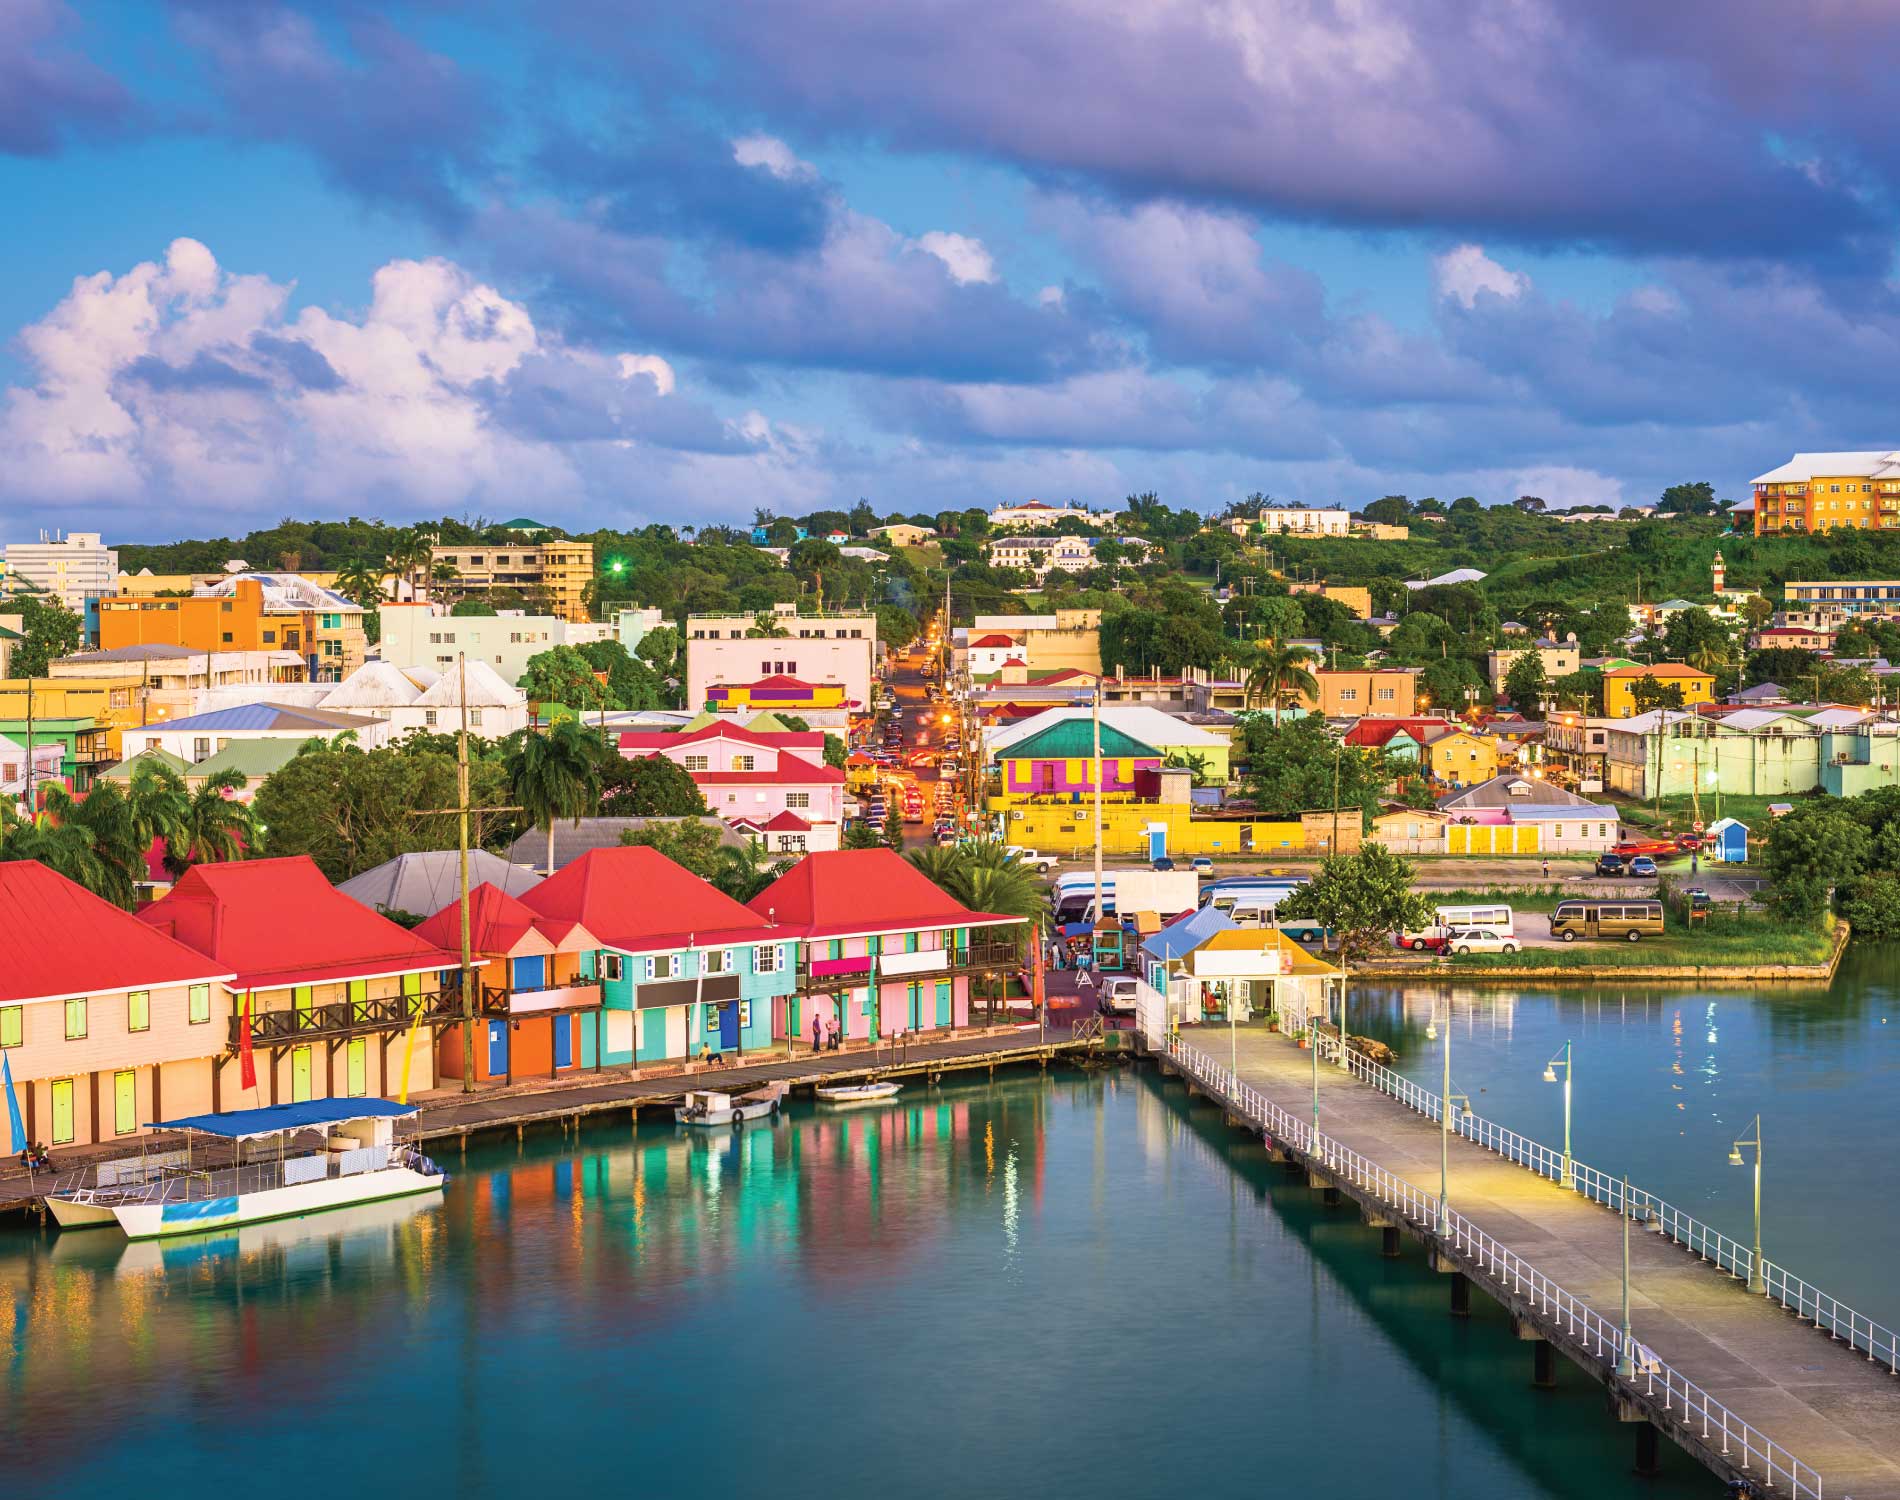 /-/media/images/website/background-images/offices/antigua/antigua_background_01.ashx